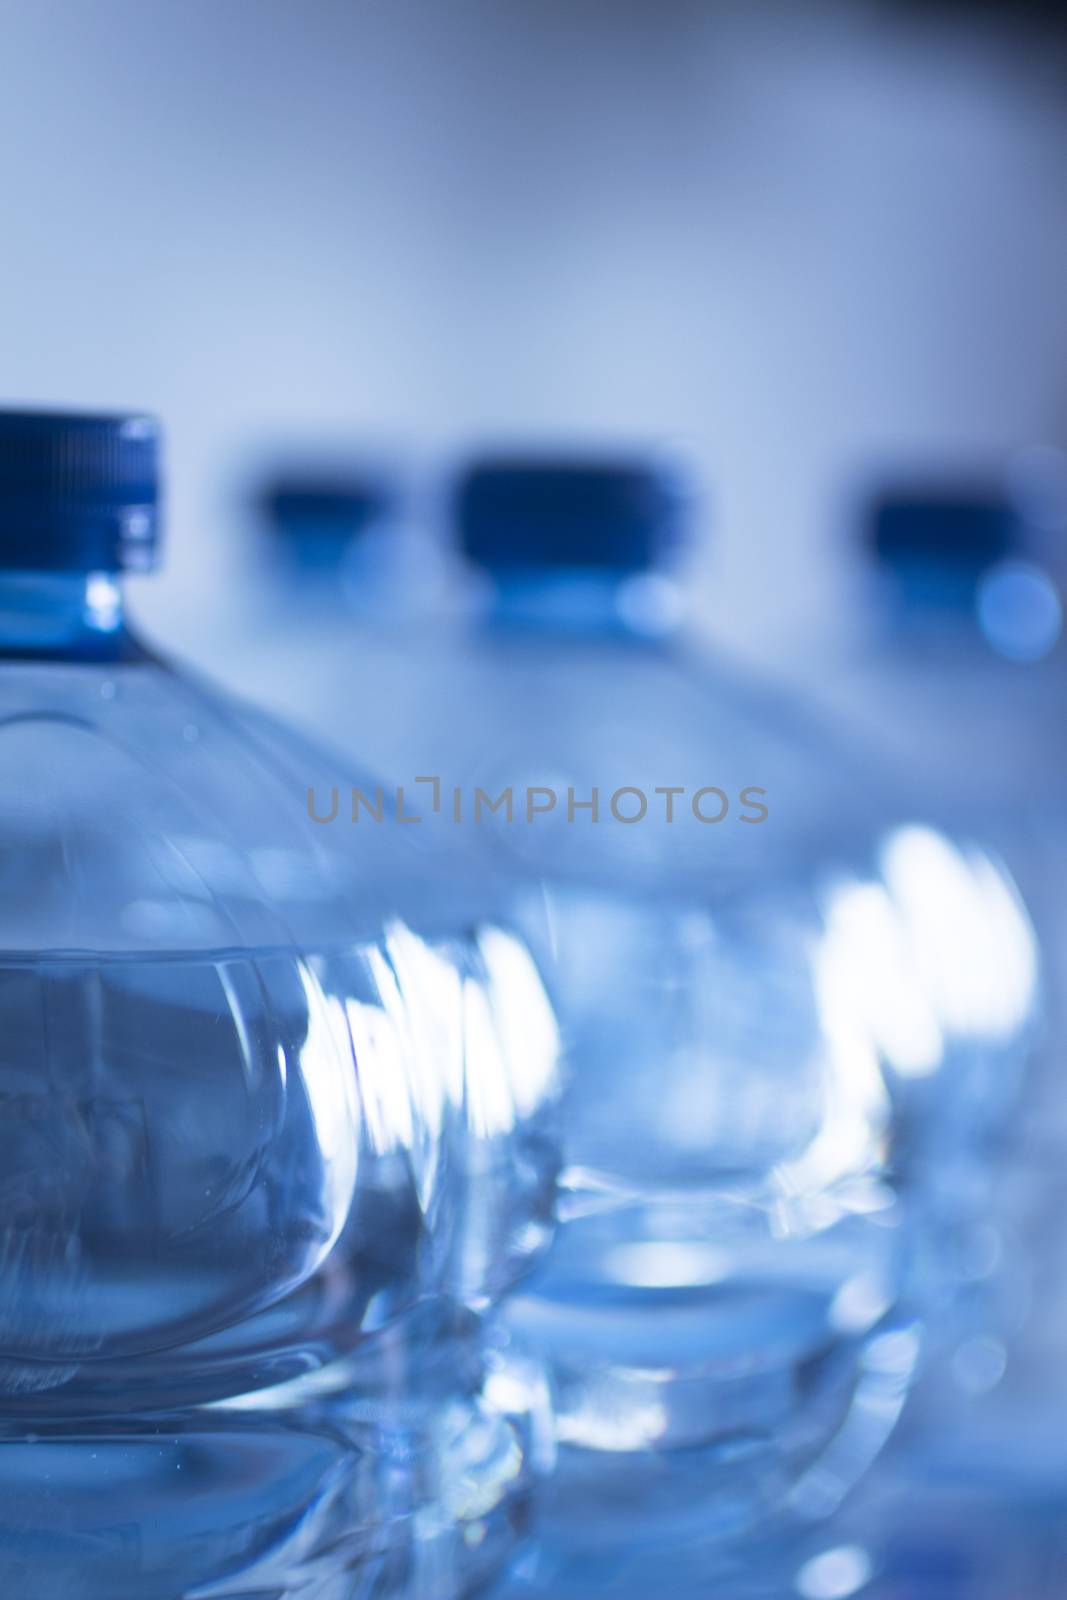 Isolated blue plastic water bottles on a plain blue studio background close-up photo.